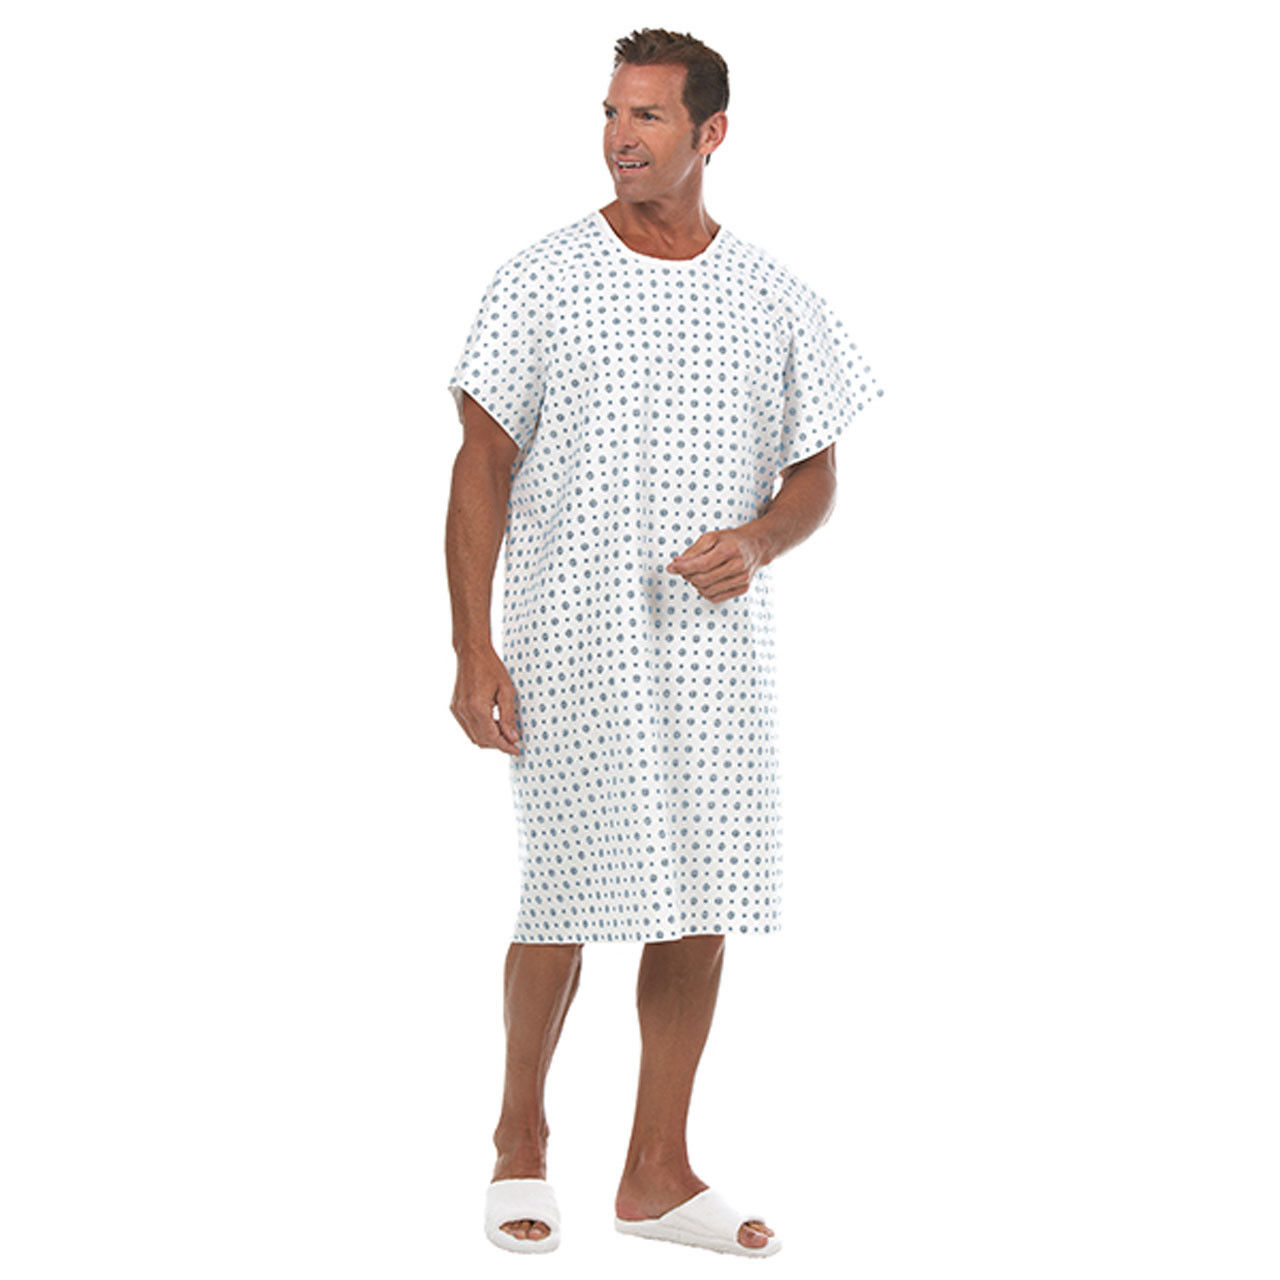 Is wearing bulk hospital gowns comfortable?